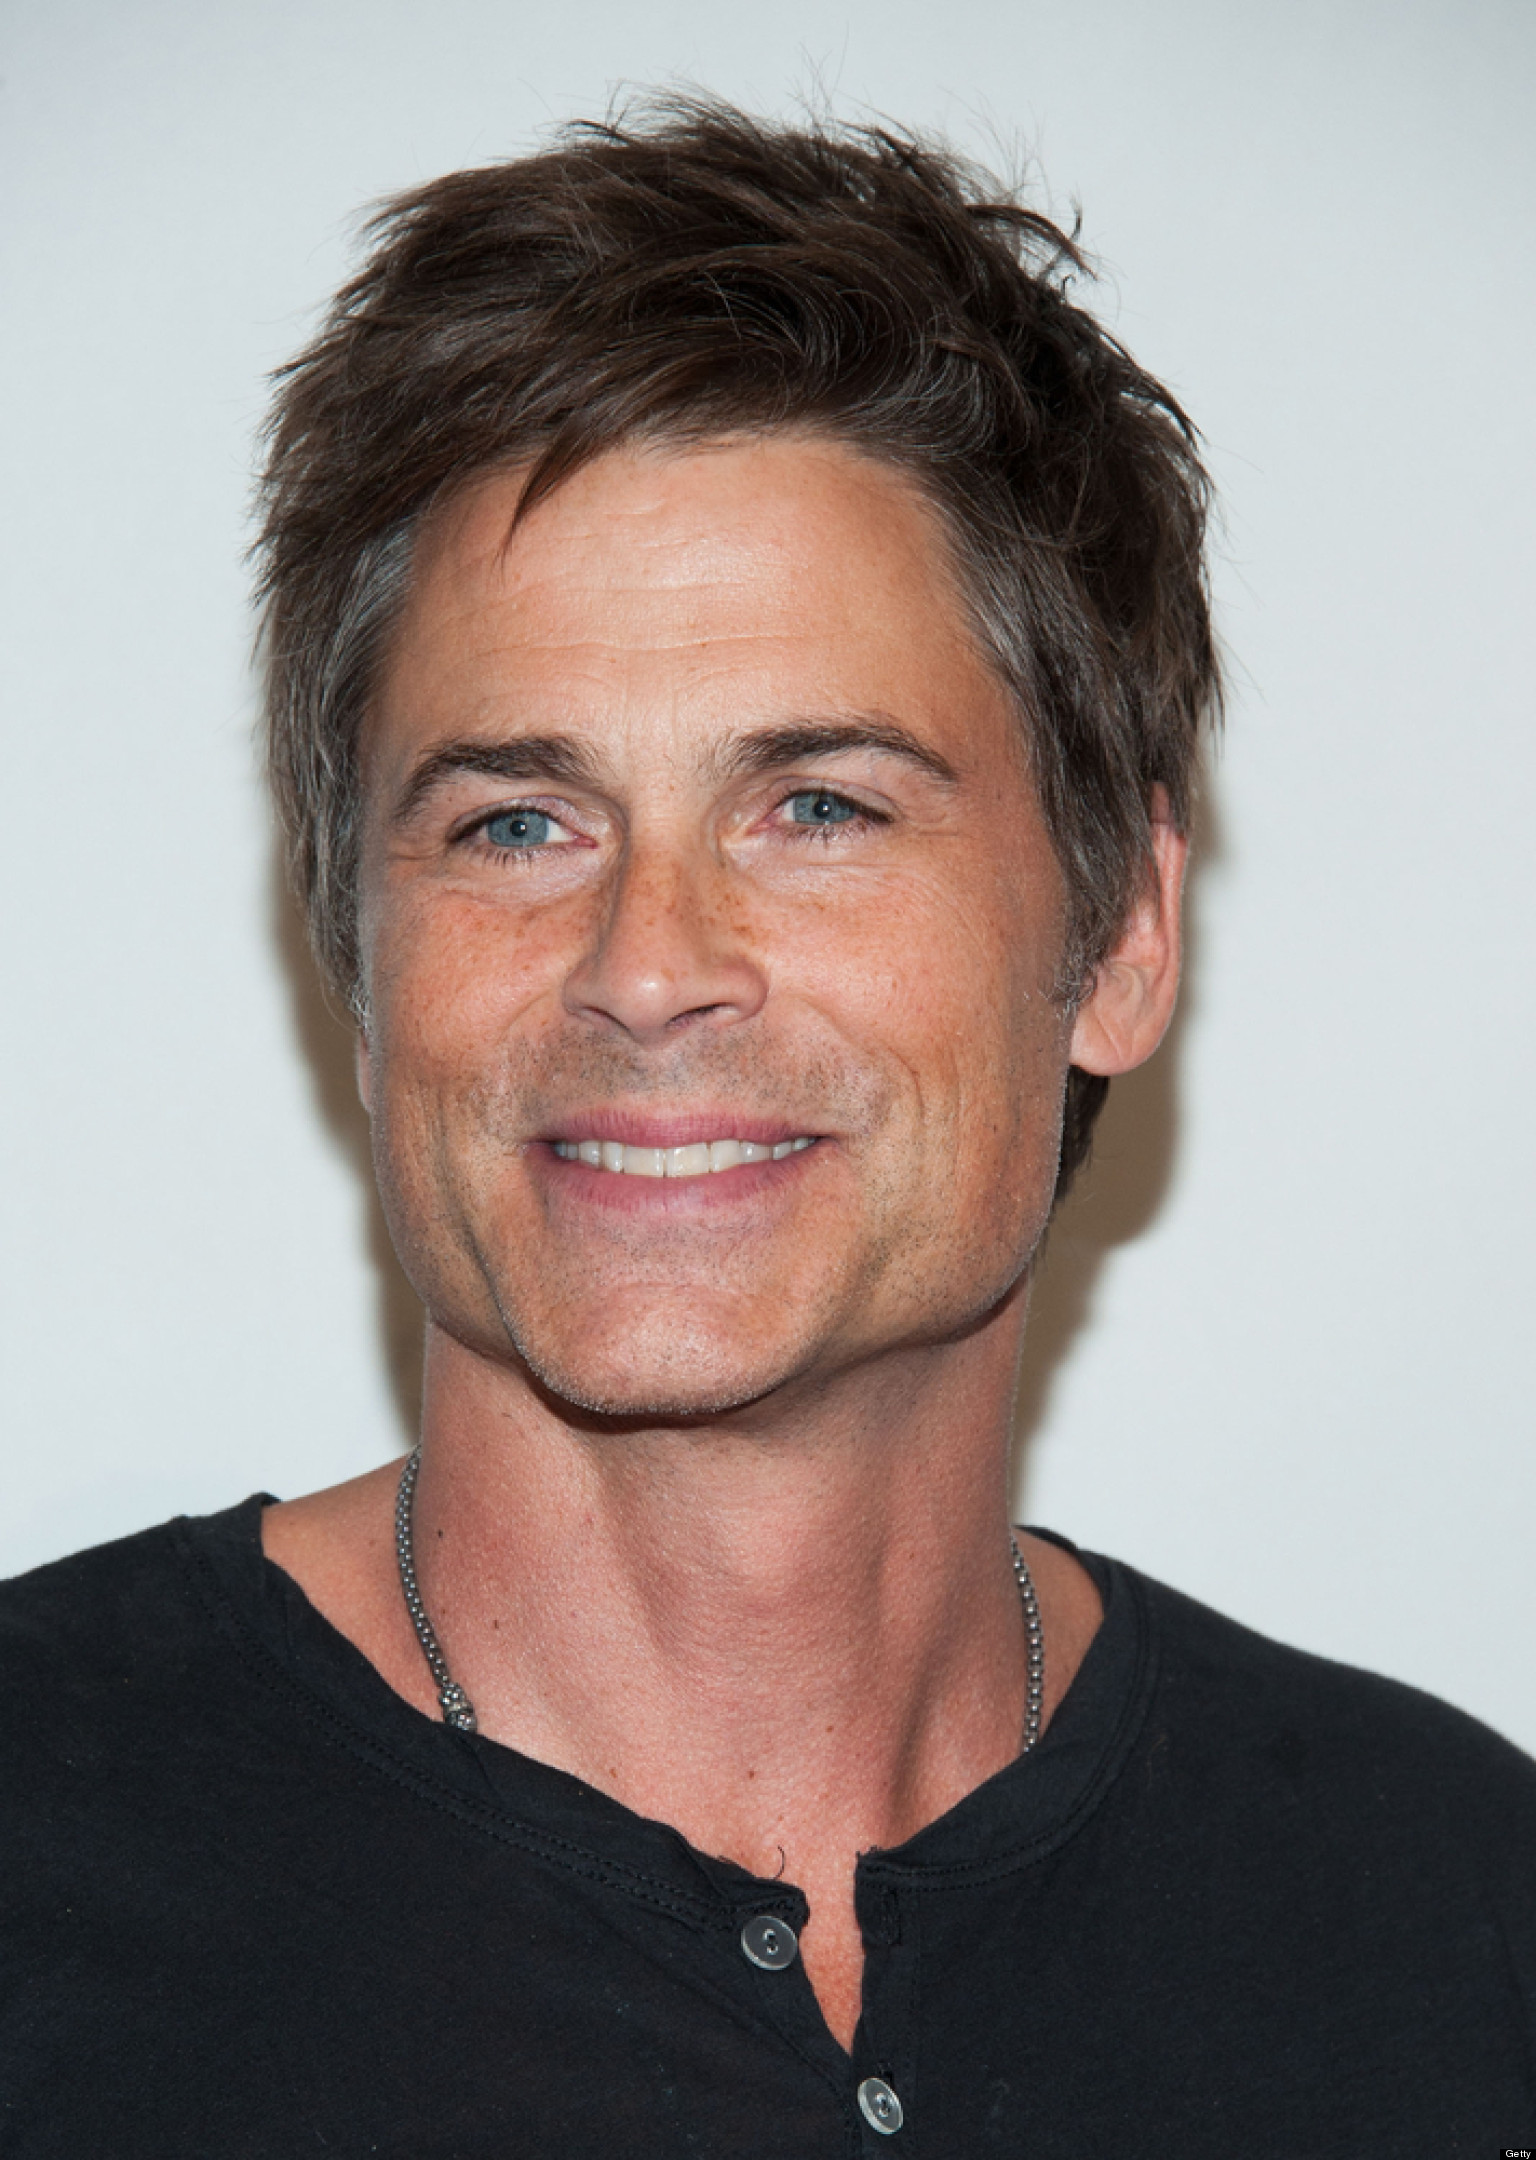 9 Things Rob Lowe Would Be Frightened To Know Live On The Internet ...